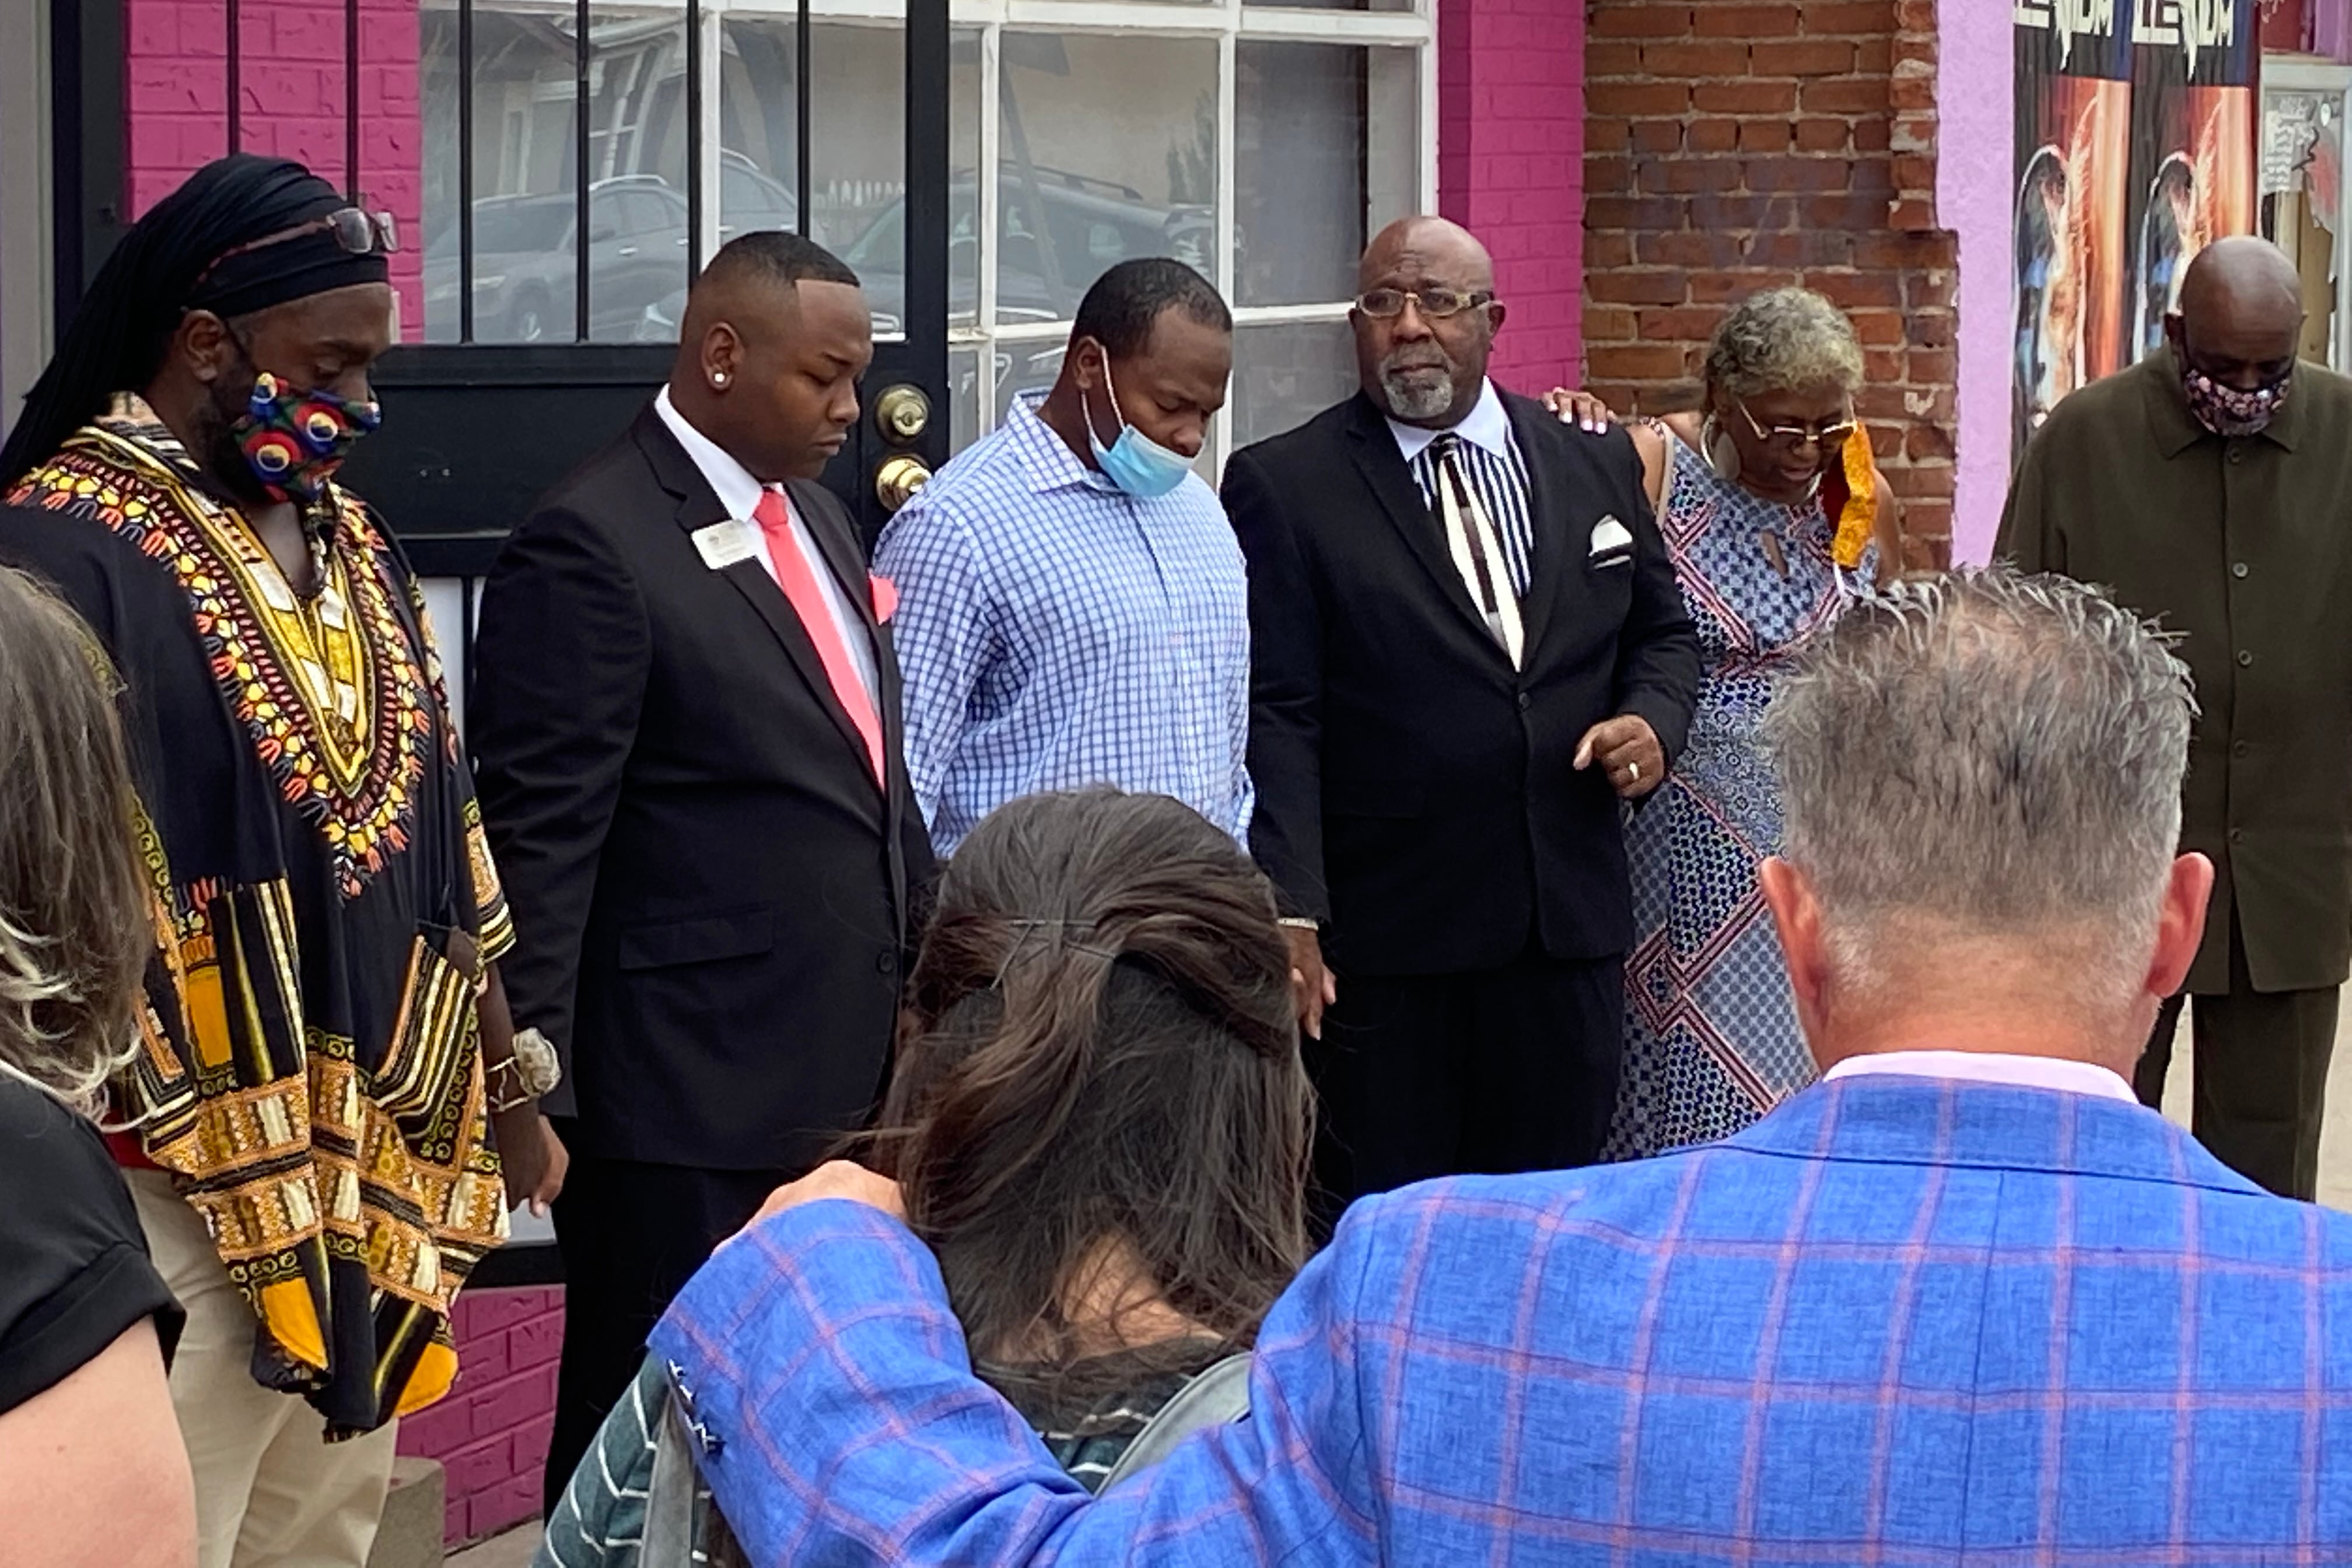 Denver school board member Tay Anderson, second from left, dressed in a suit and red tie, stands with his head bowed in prayer. He is standing in a circle of supporters holding hands.